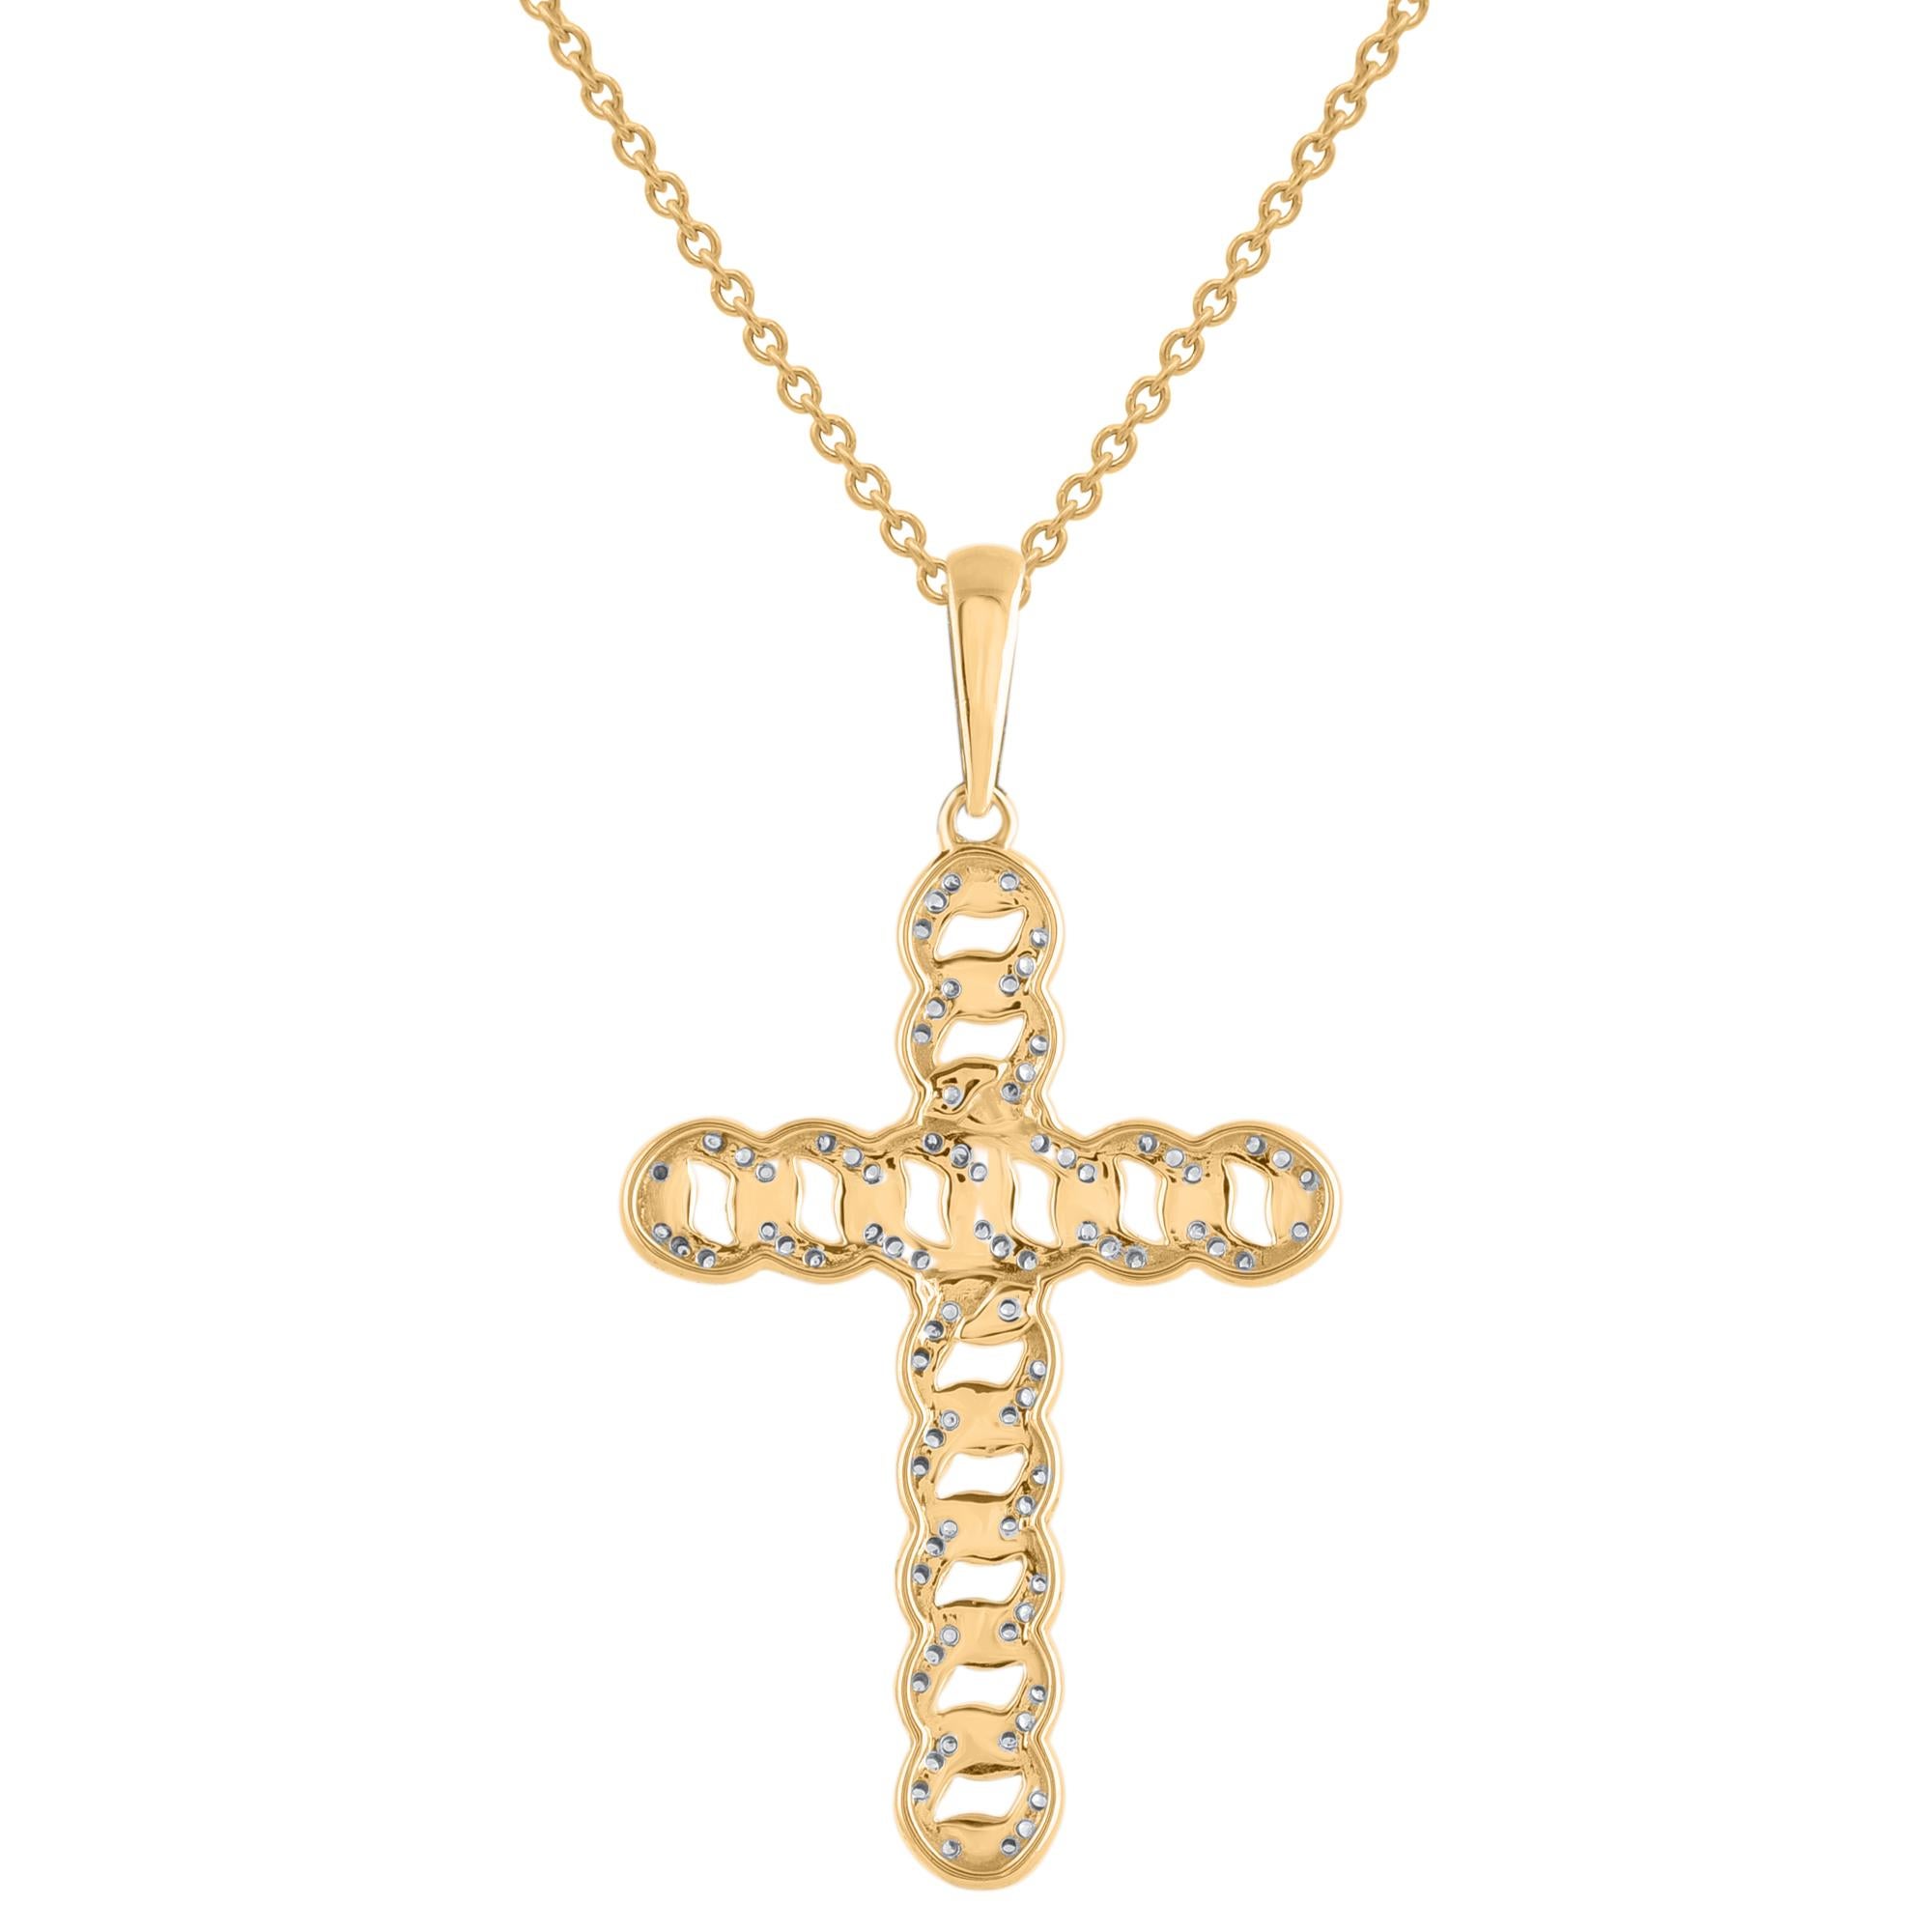 Modern TJD 0.20 Carat Round Cut Diamond Cross Pendant Necklace in 14KT Yellow Gold For Sale